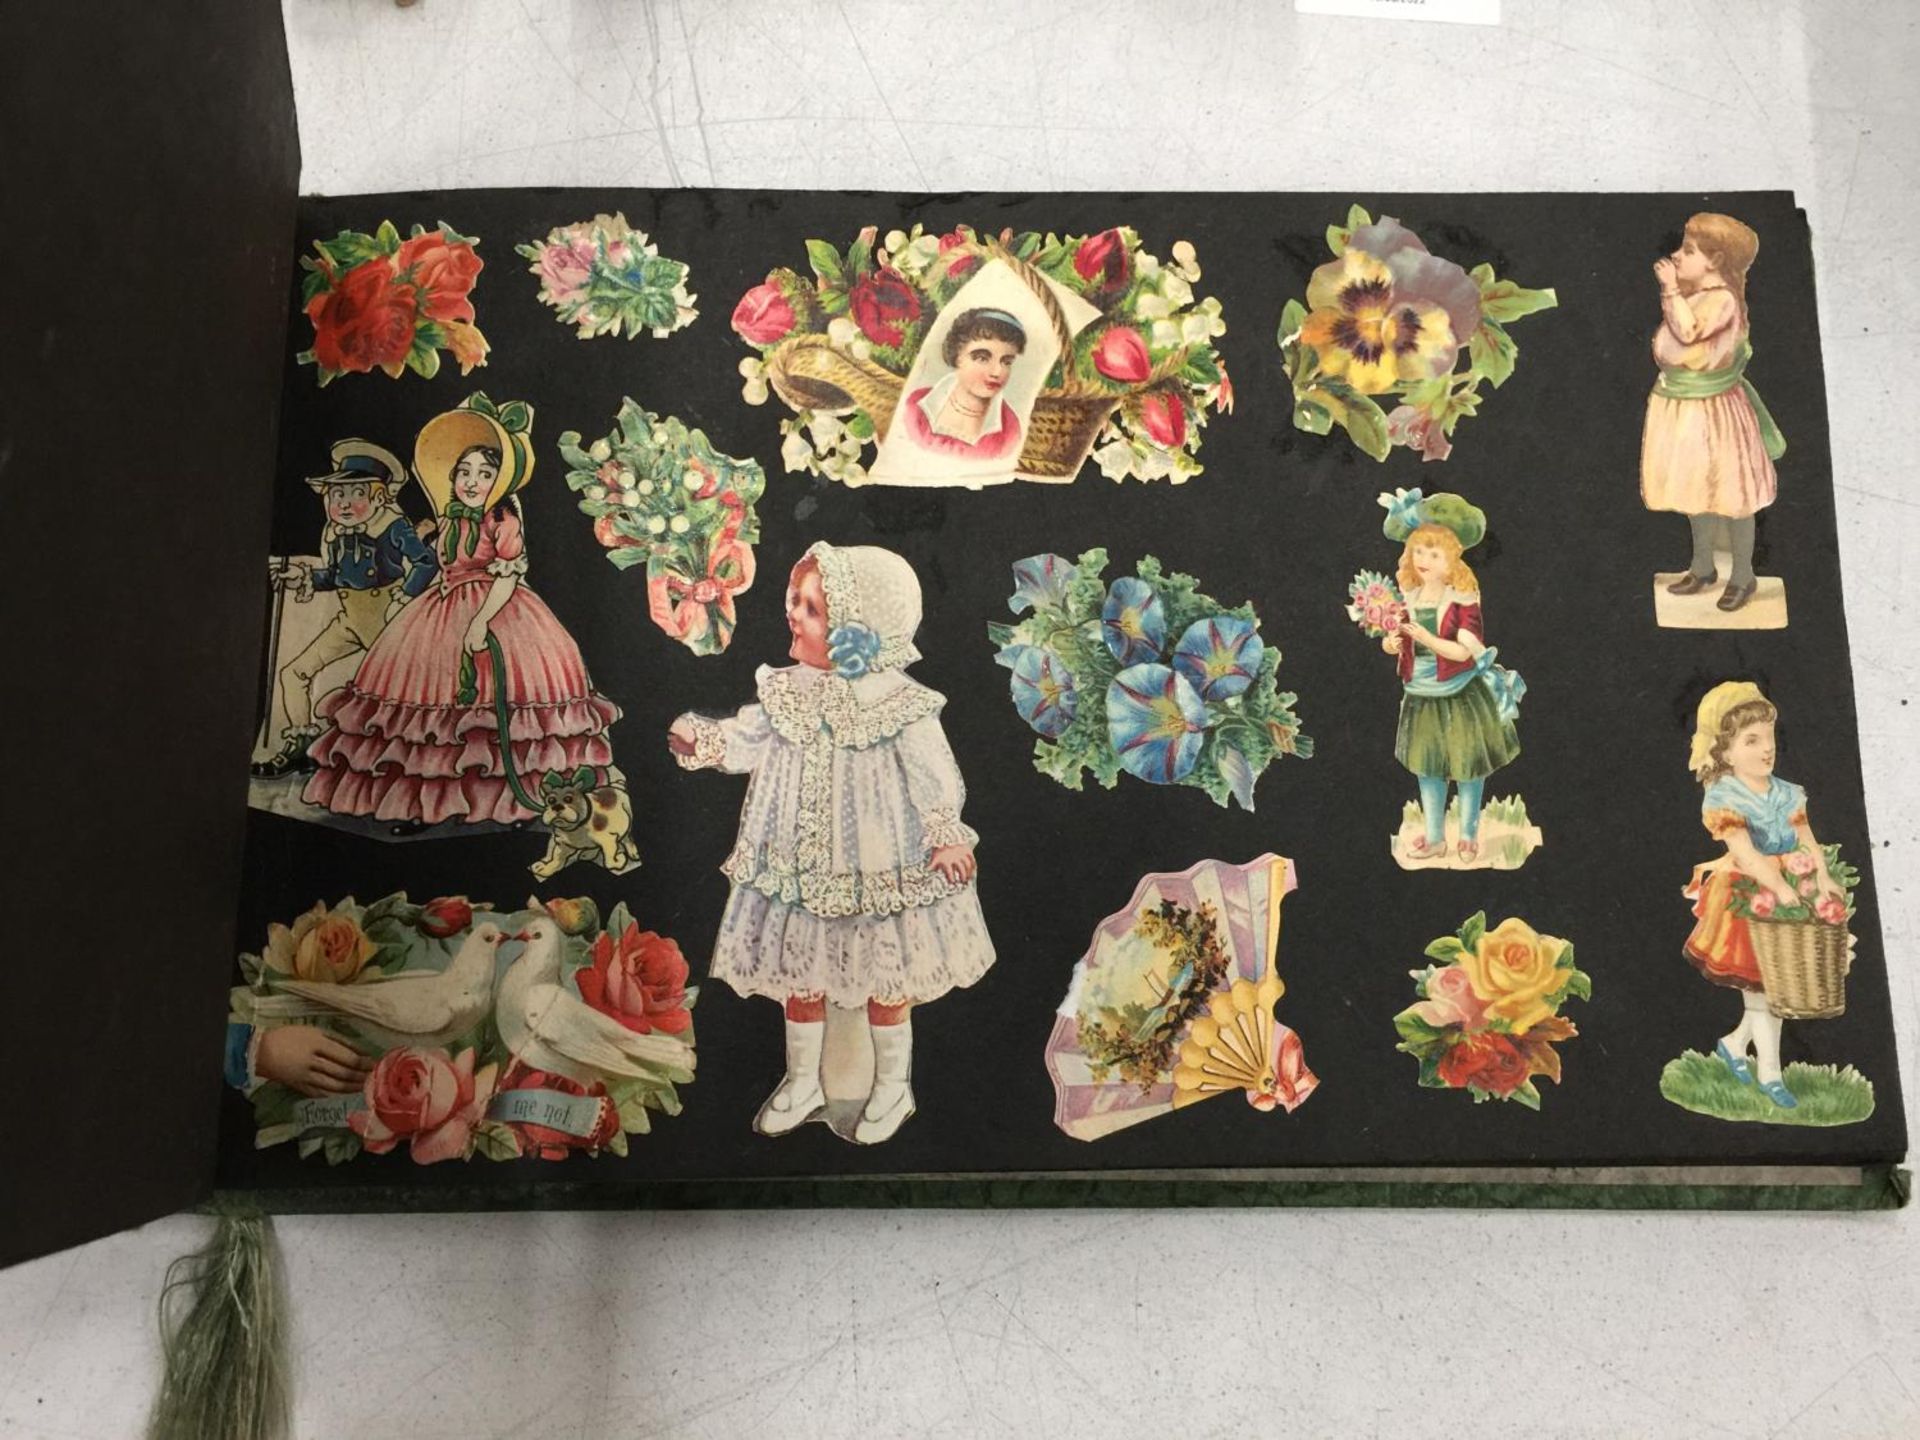 A VINTAGE SCRAPBOOK FILLED WITH VICTORIAN IMAGES - Image 3 of 5